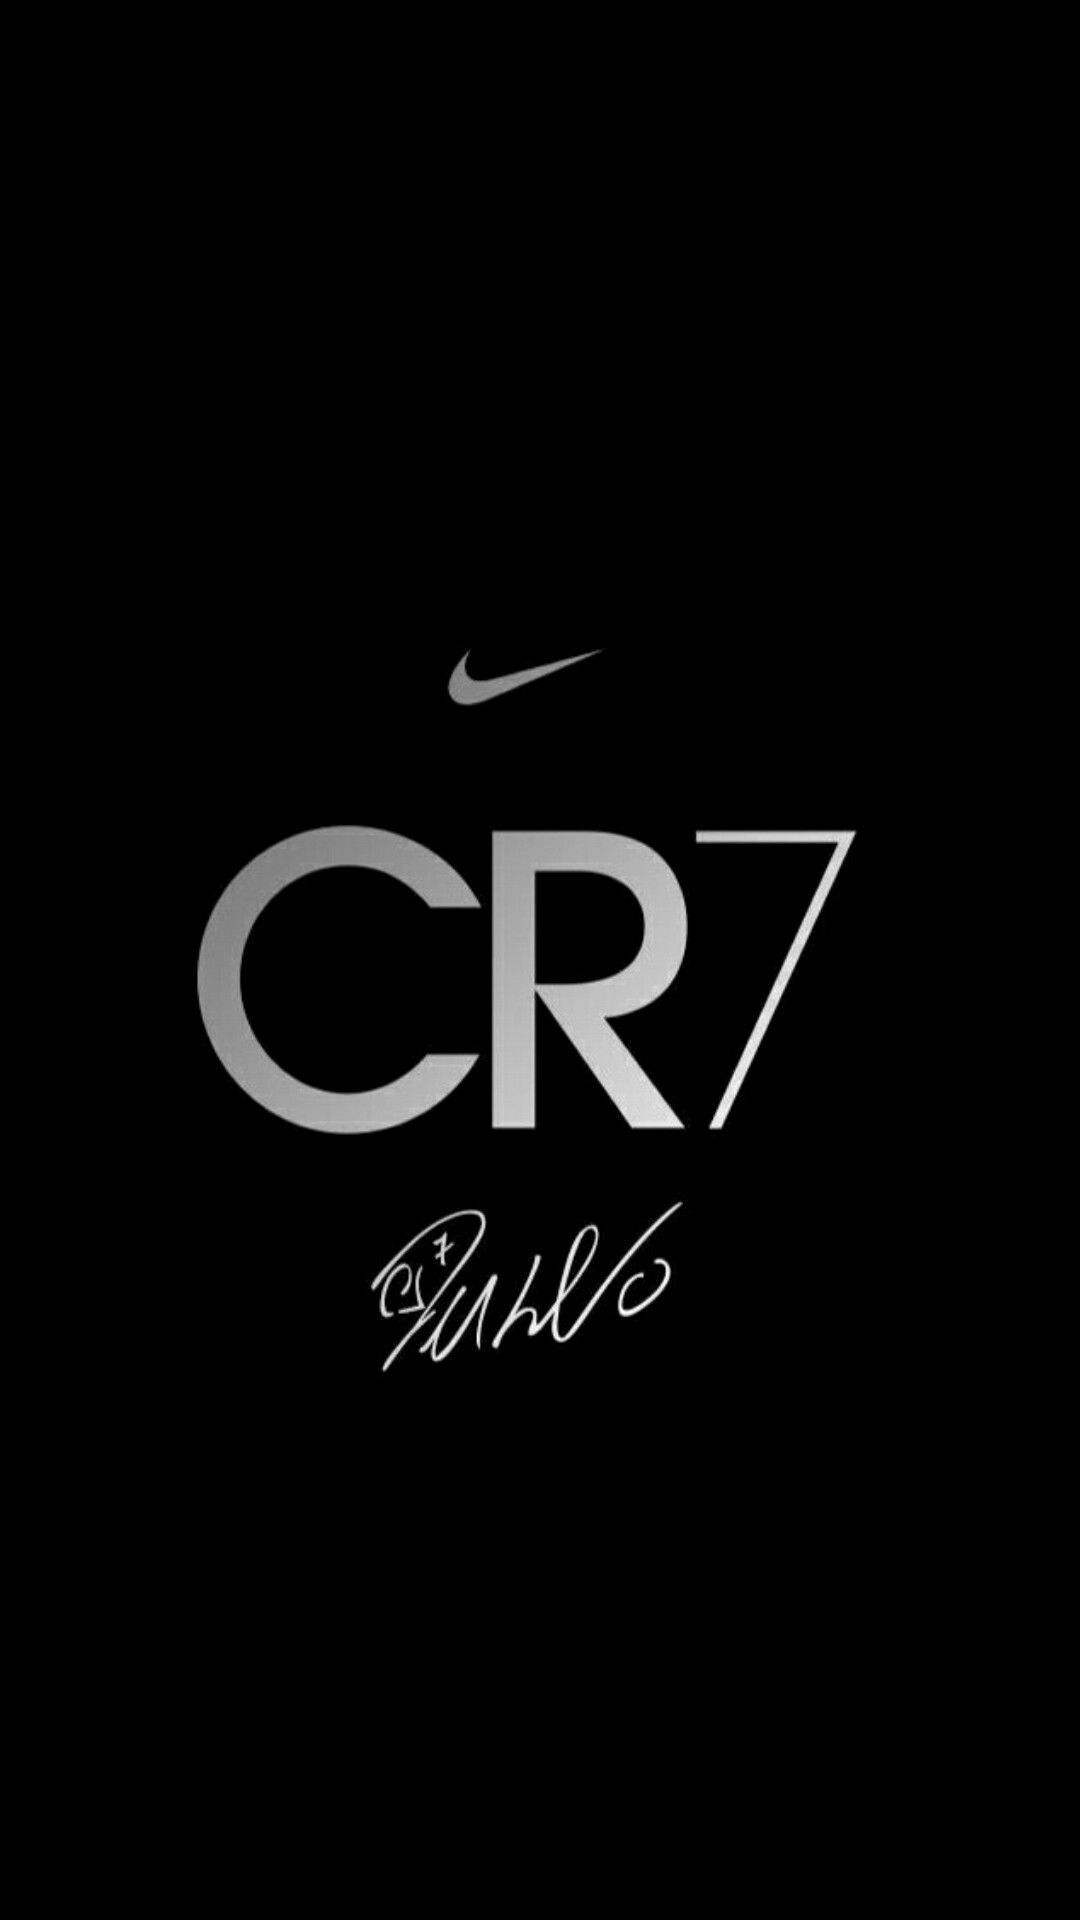 Background Cr7 Wallpaper Discover More Captain Forward Play